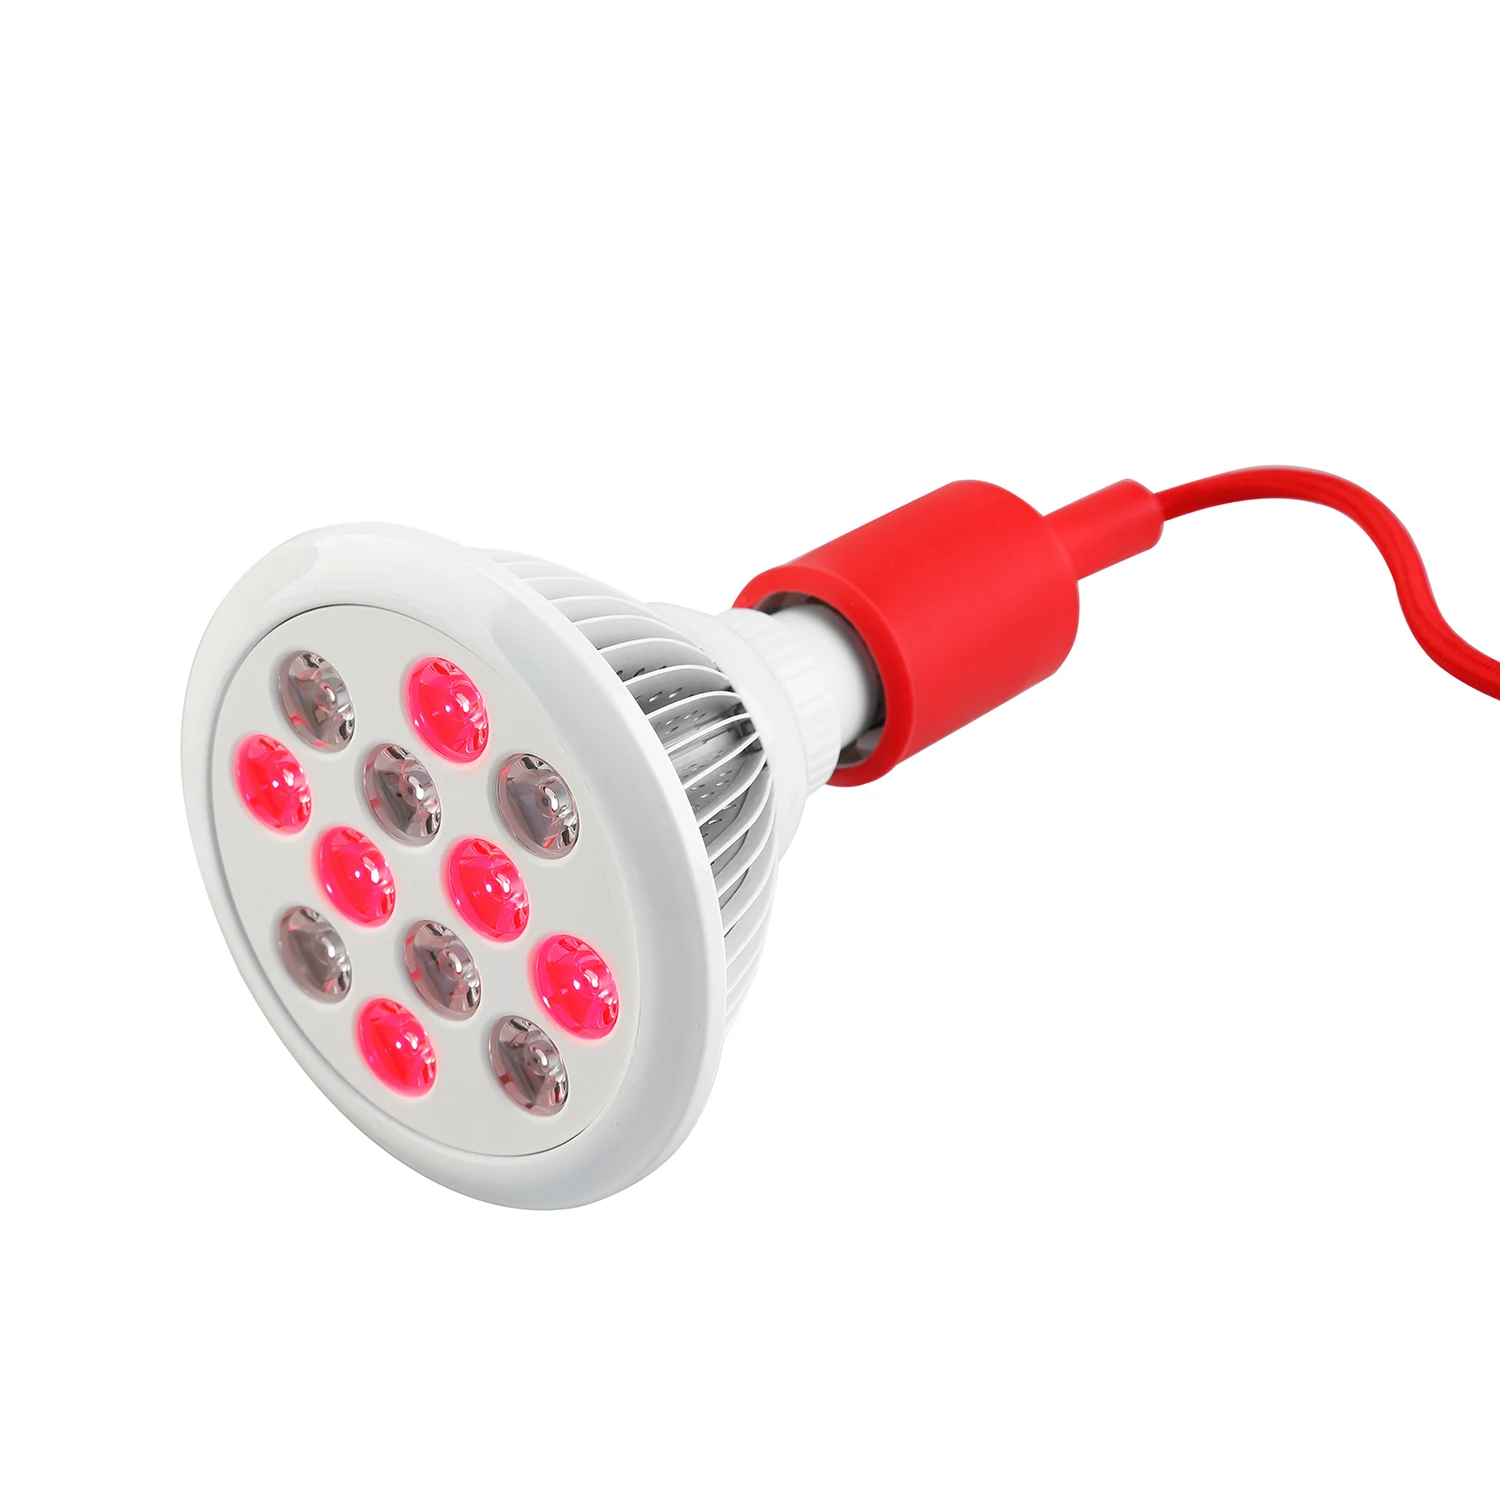 SGROW Cheap Price 24W Red Led Light Therapy Bulb for Skin Problem, PDT Machine Reduce Wrinkles Led Light Therapy